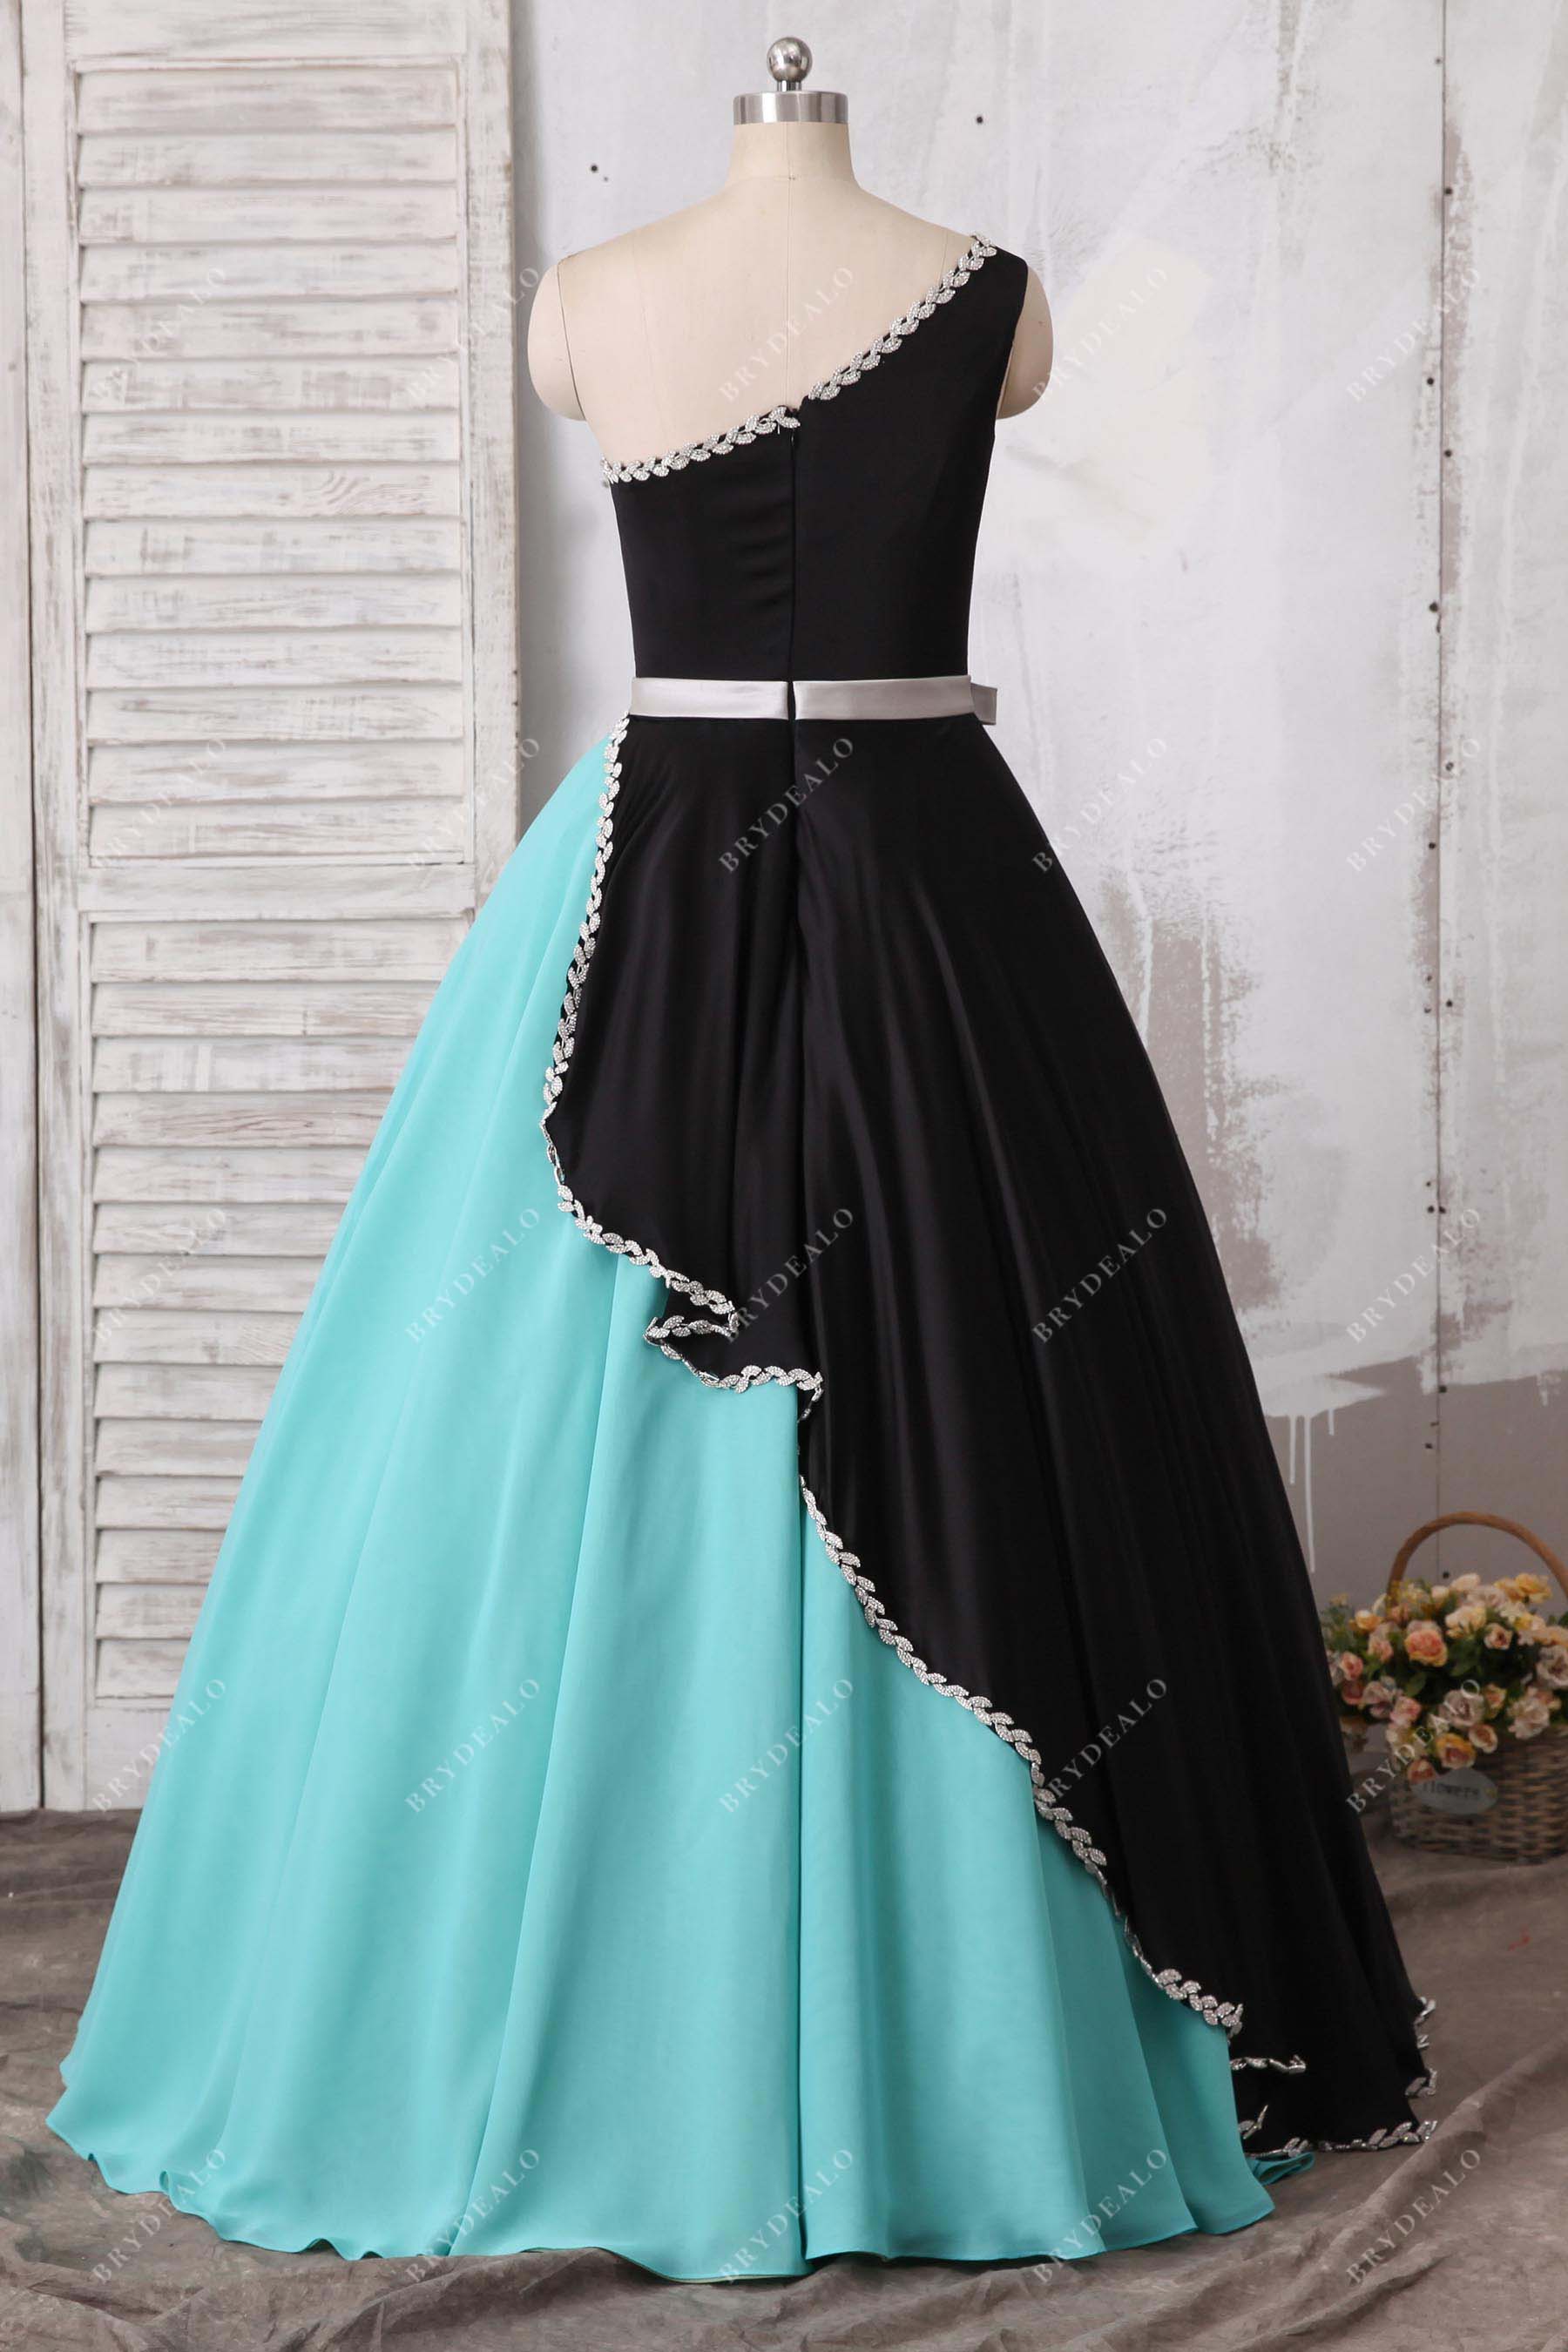 one sleeve ball gown satin prom dress